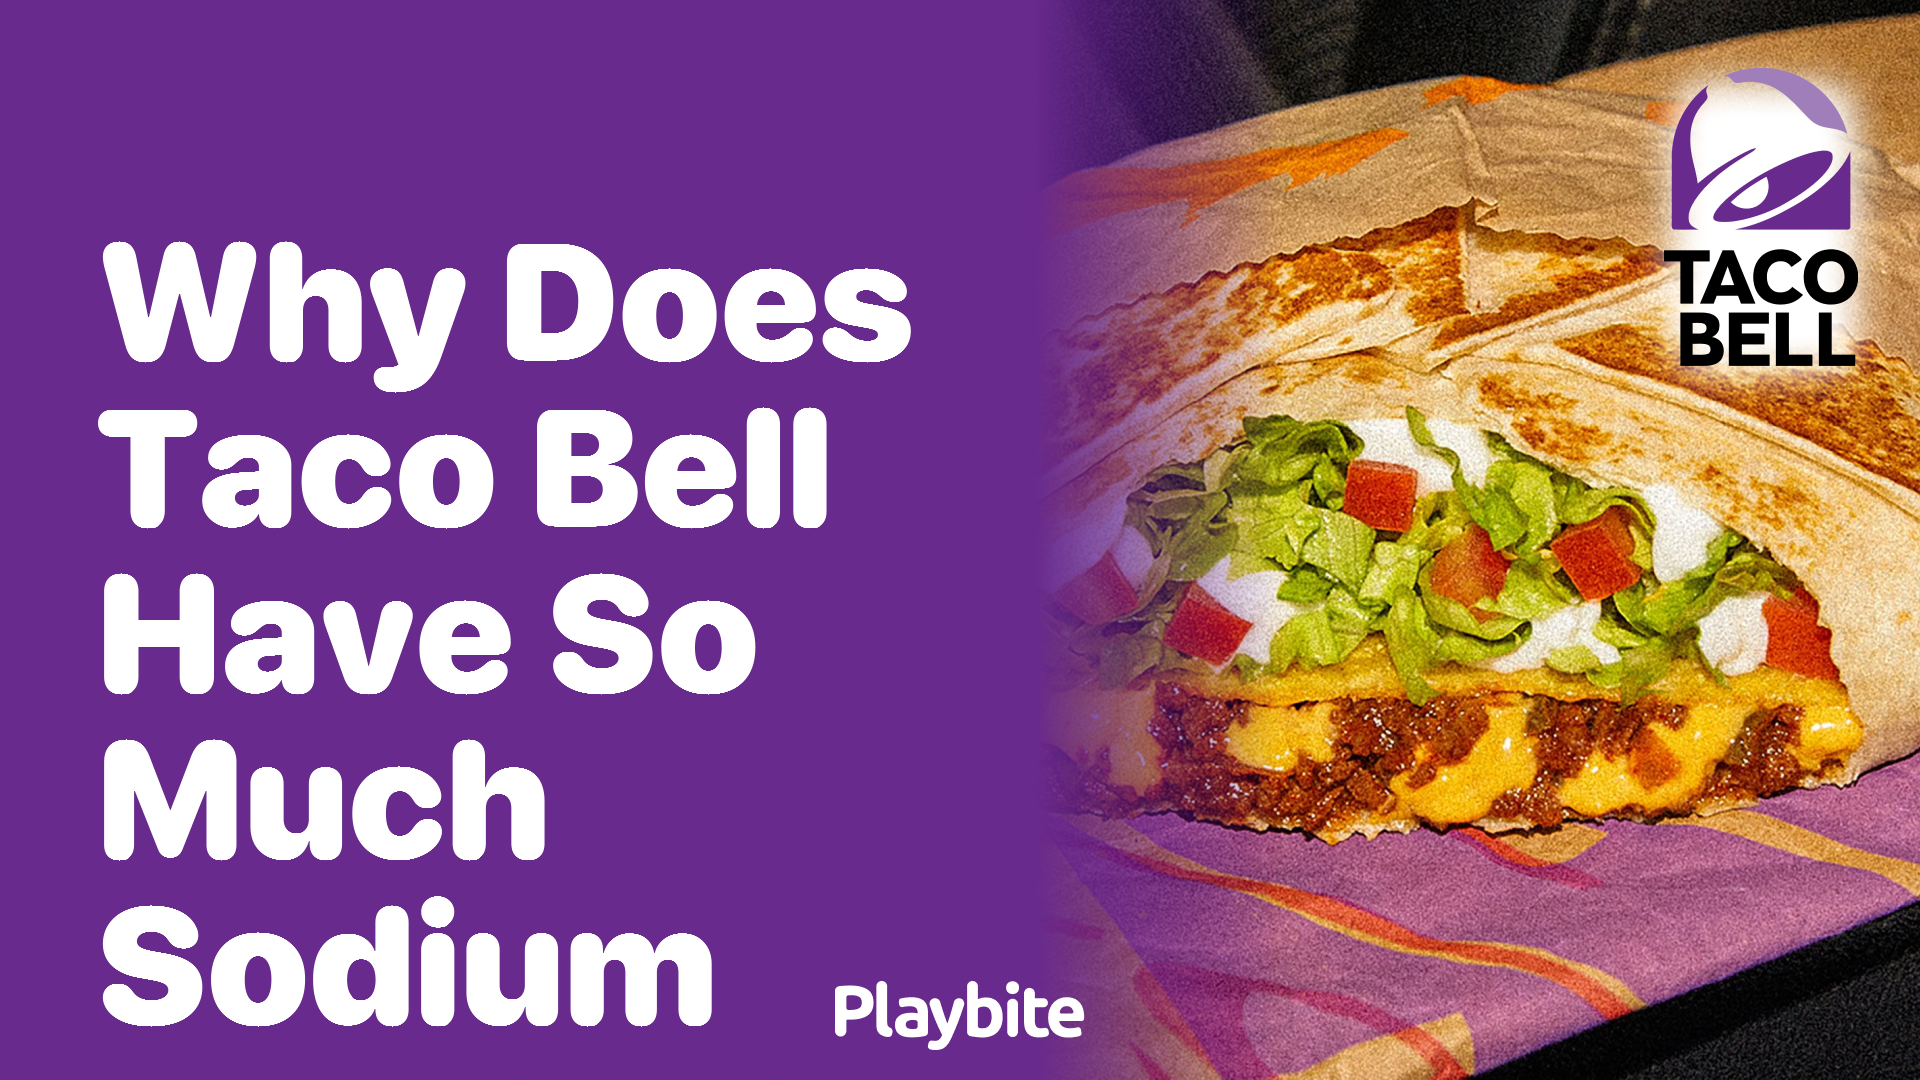 Why Does Taco Bell Have So Much Sodium?